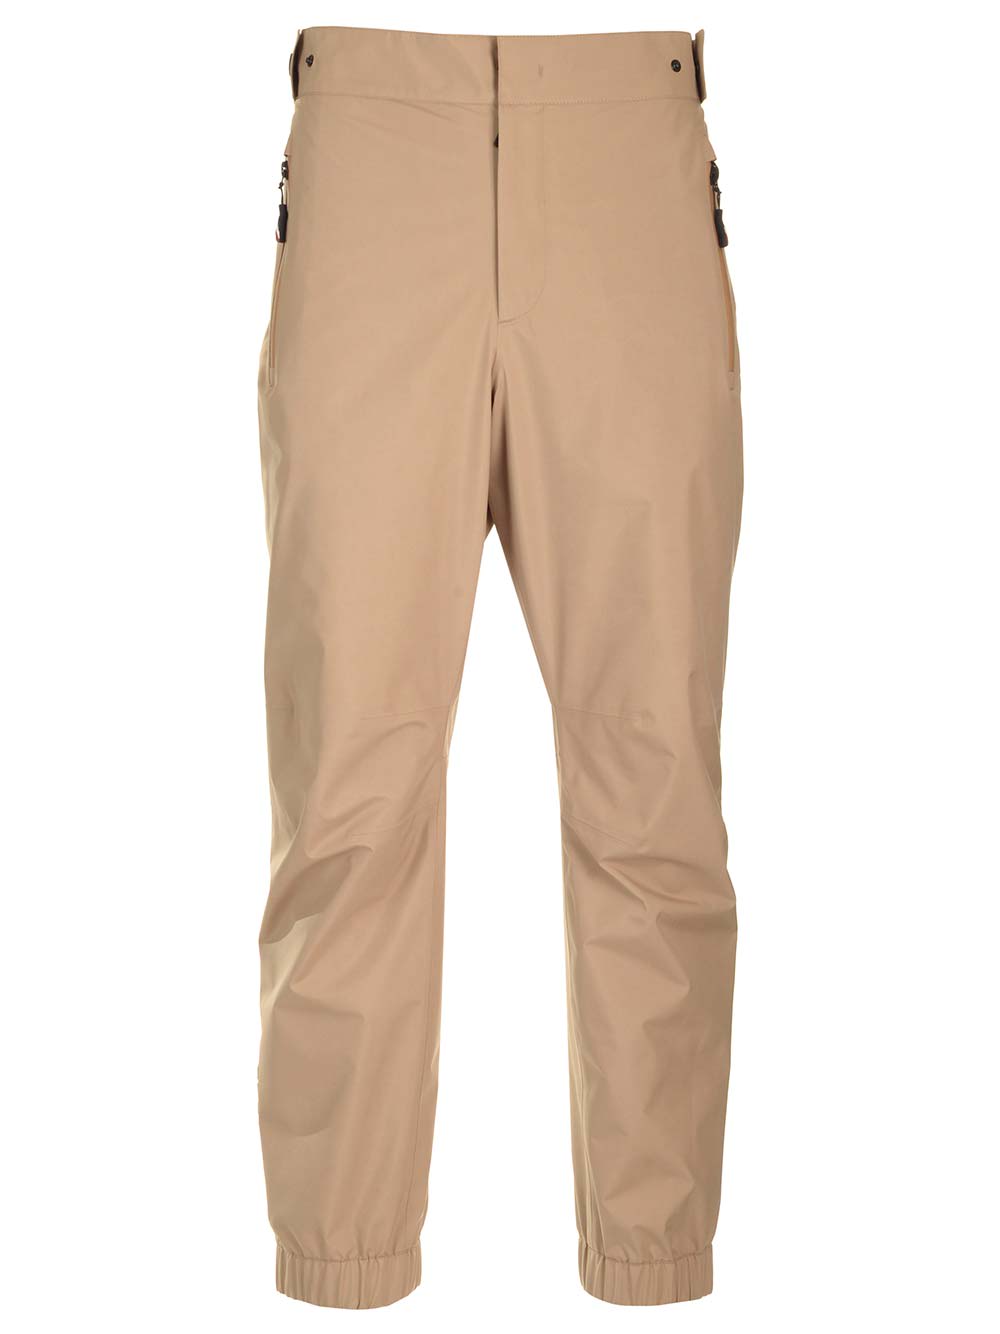 MONCLER GORE-TEX FABRIC TROUSERS